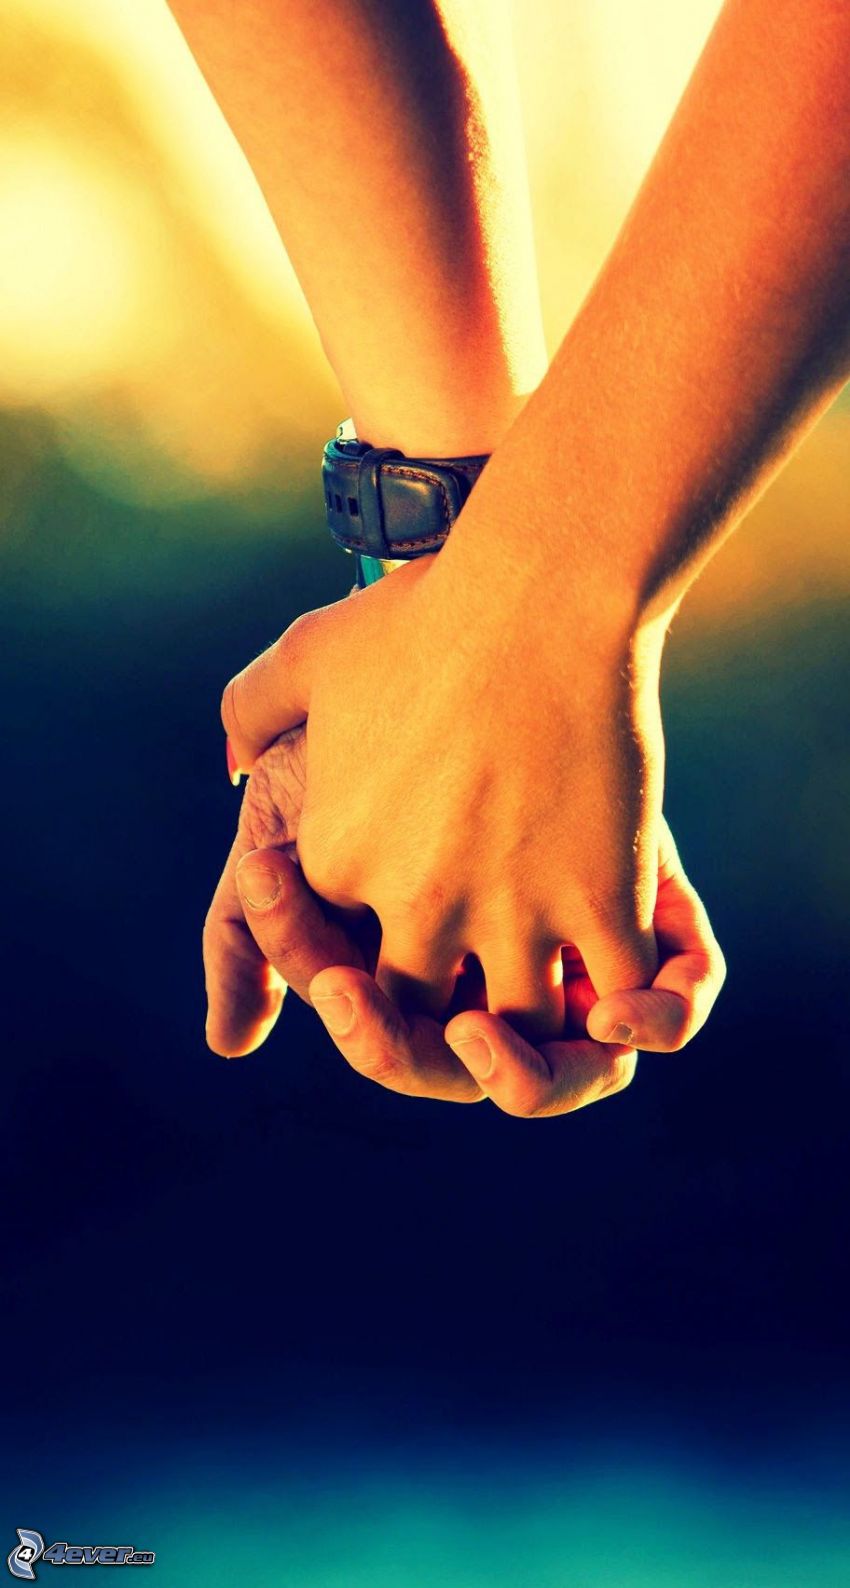 holding hands, watch